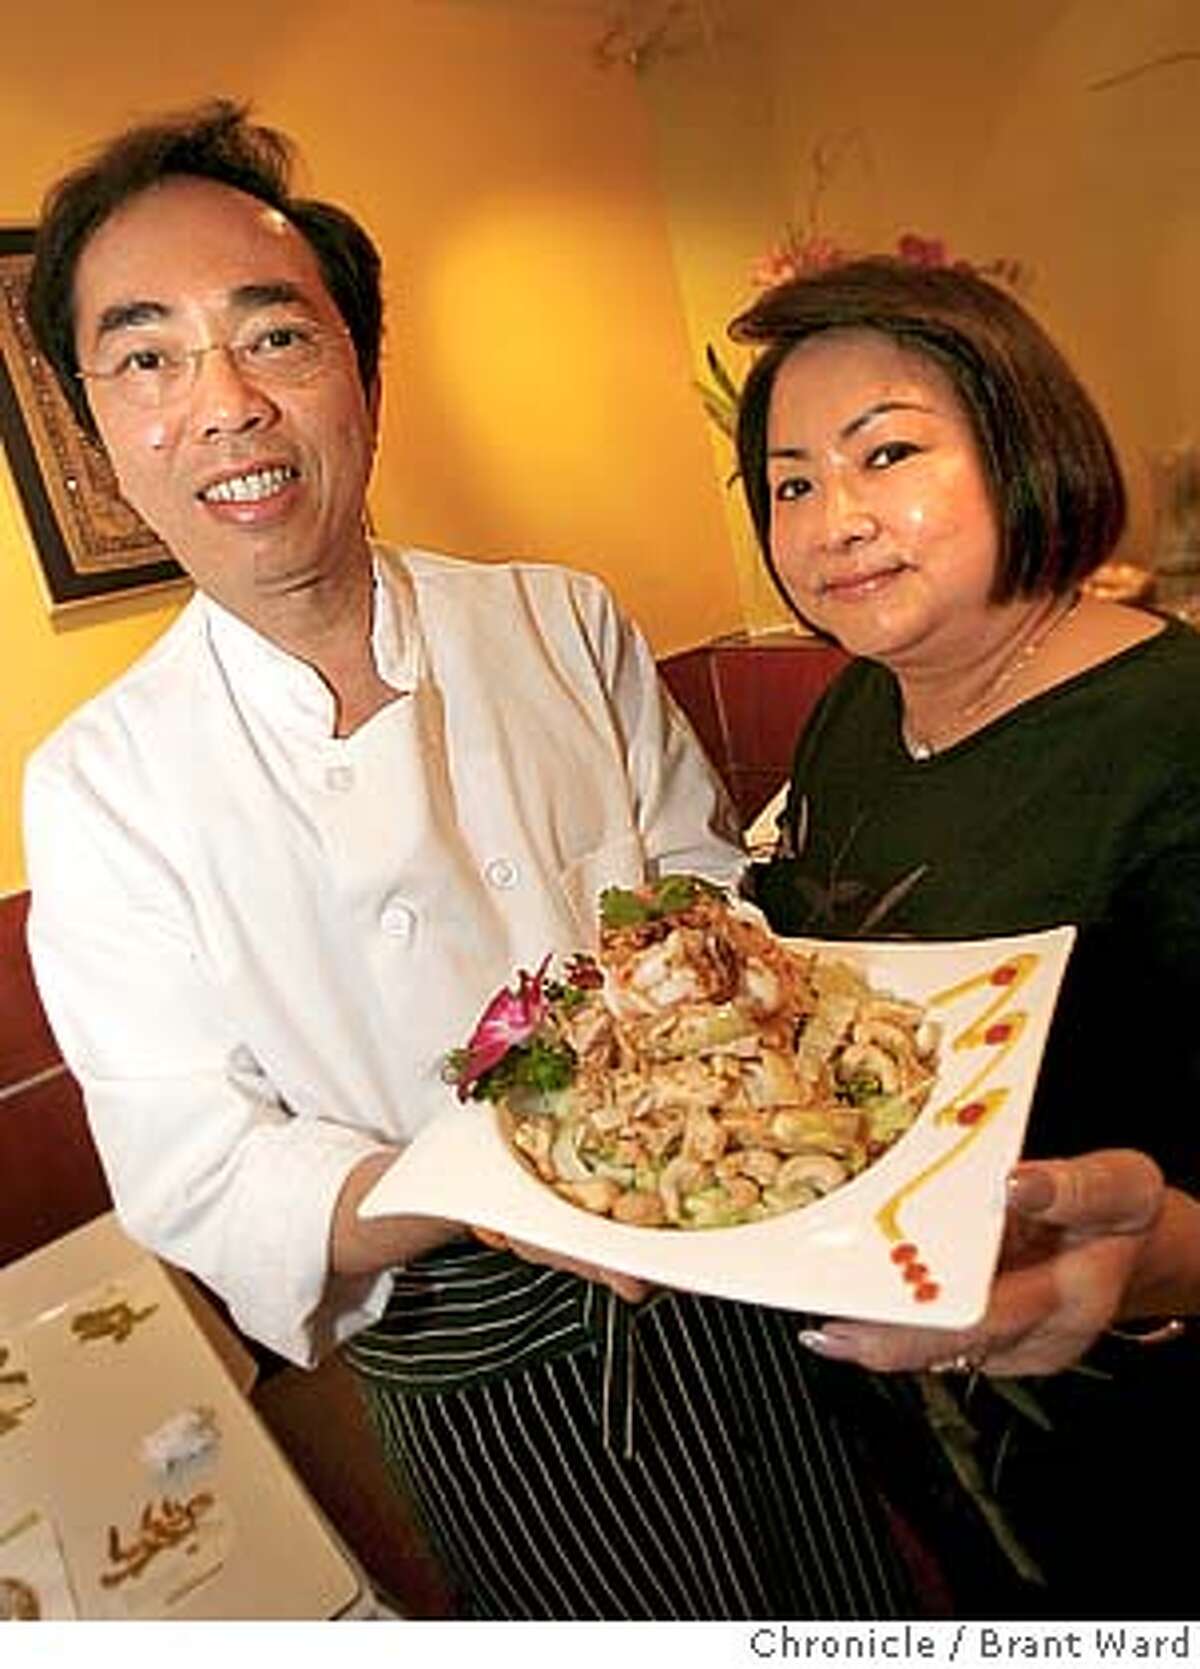 bargain23_marnee123.JPG Chai, left and May Siriyarn of Marnee Thai with their famous artichoke and banana blossom salad. Marnee Thai at 1243 9th Avenue offers quality food at budget prices. {Brant Ward/San Francisco Chronicle}11/8/06